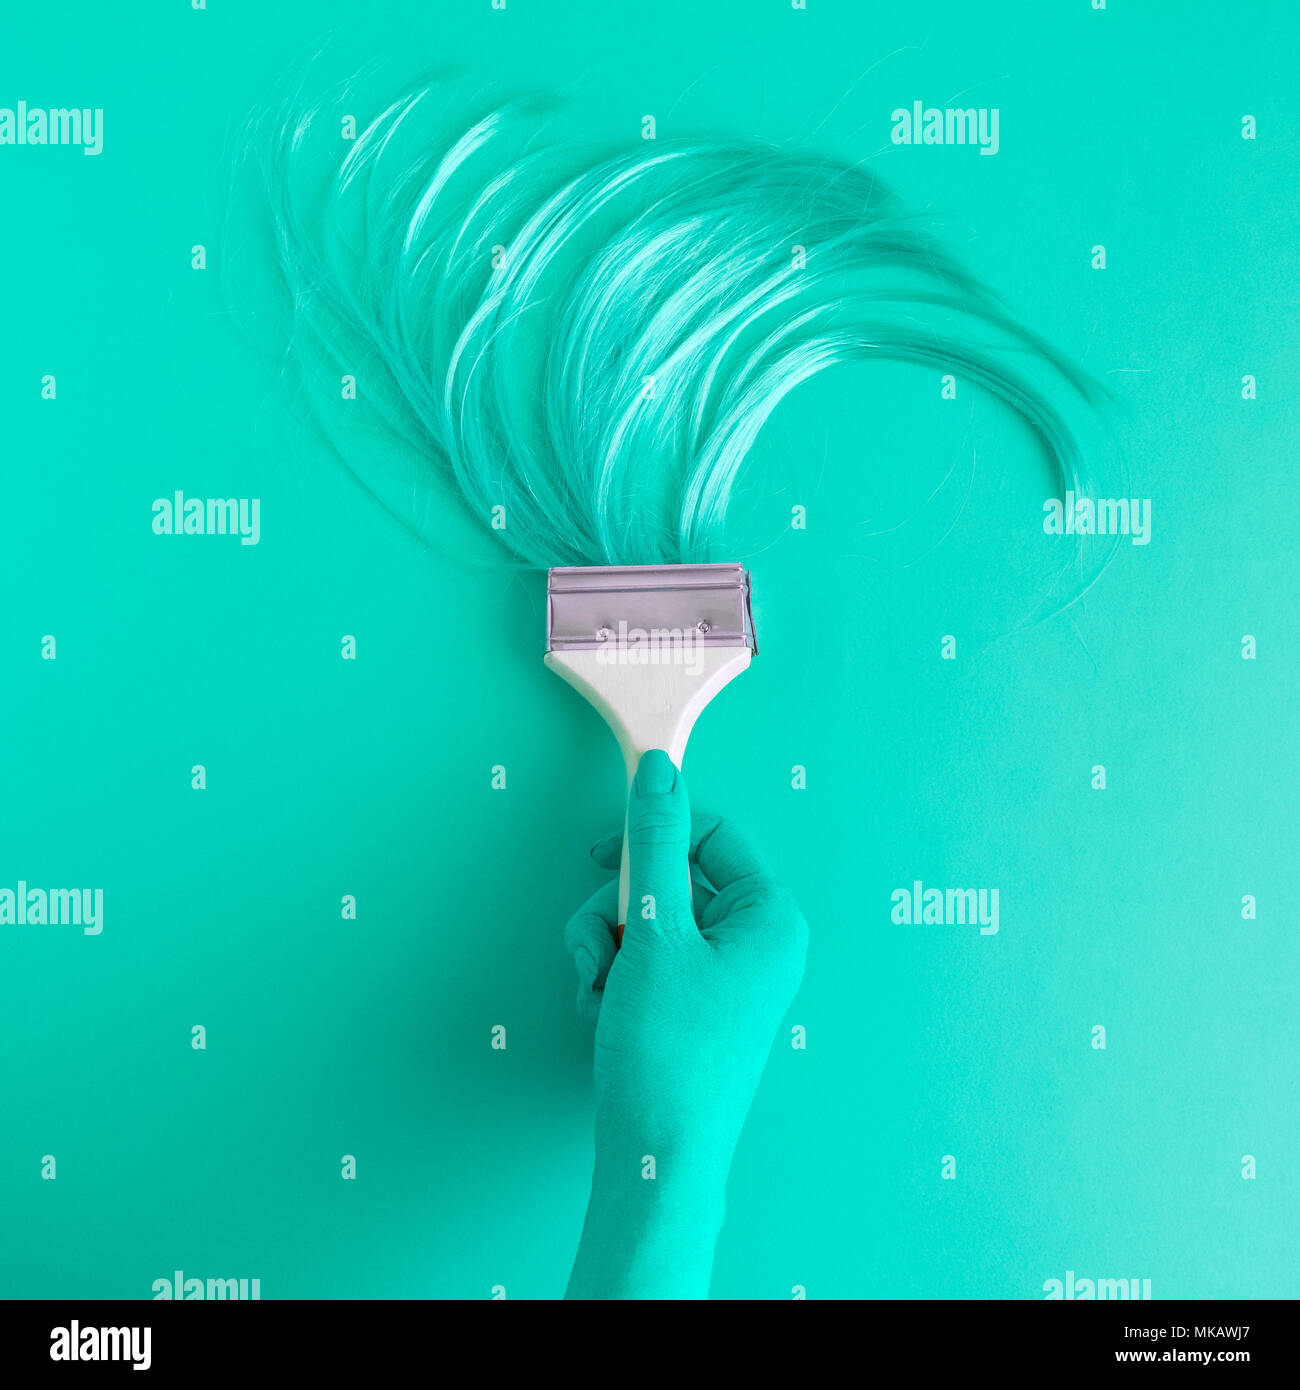 Hand holding paintbrush with long hair minimal abstract turquoise creative concept. Stock Photo